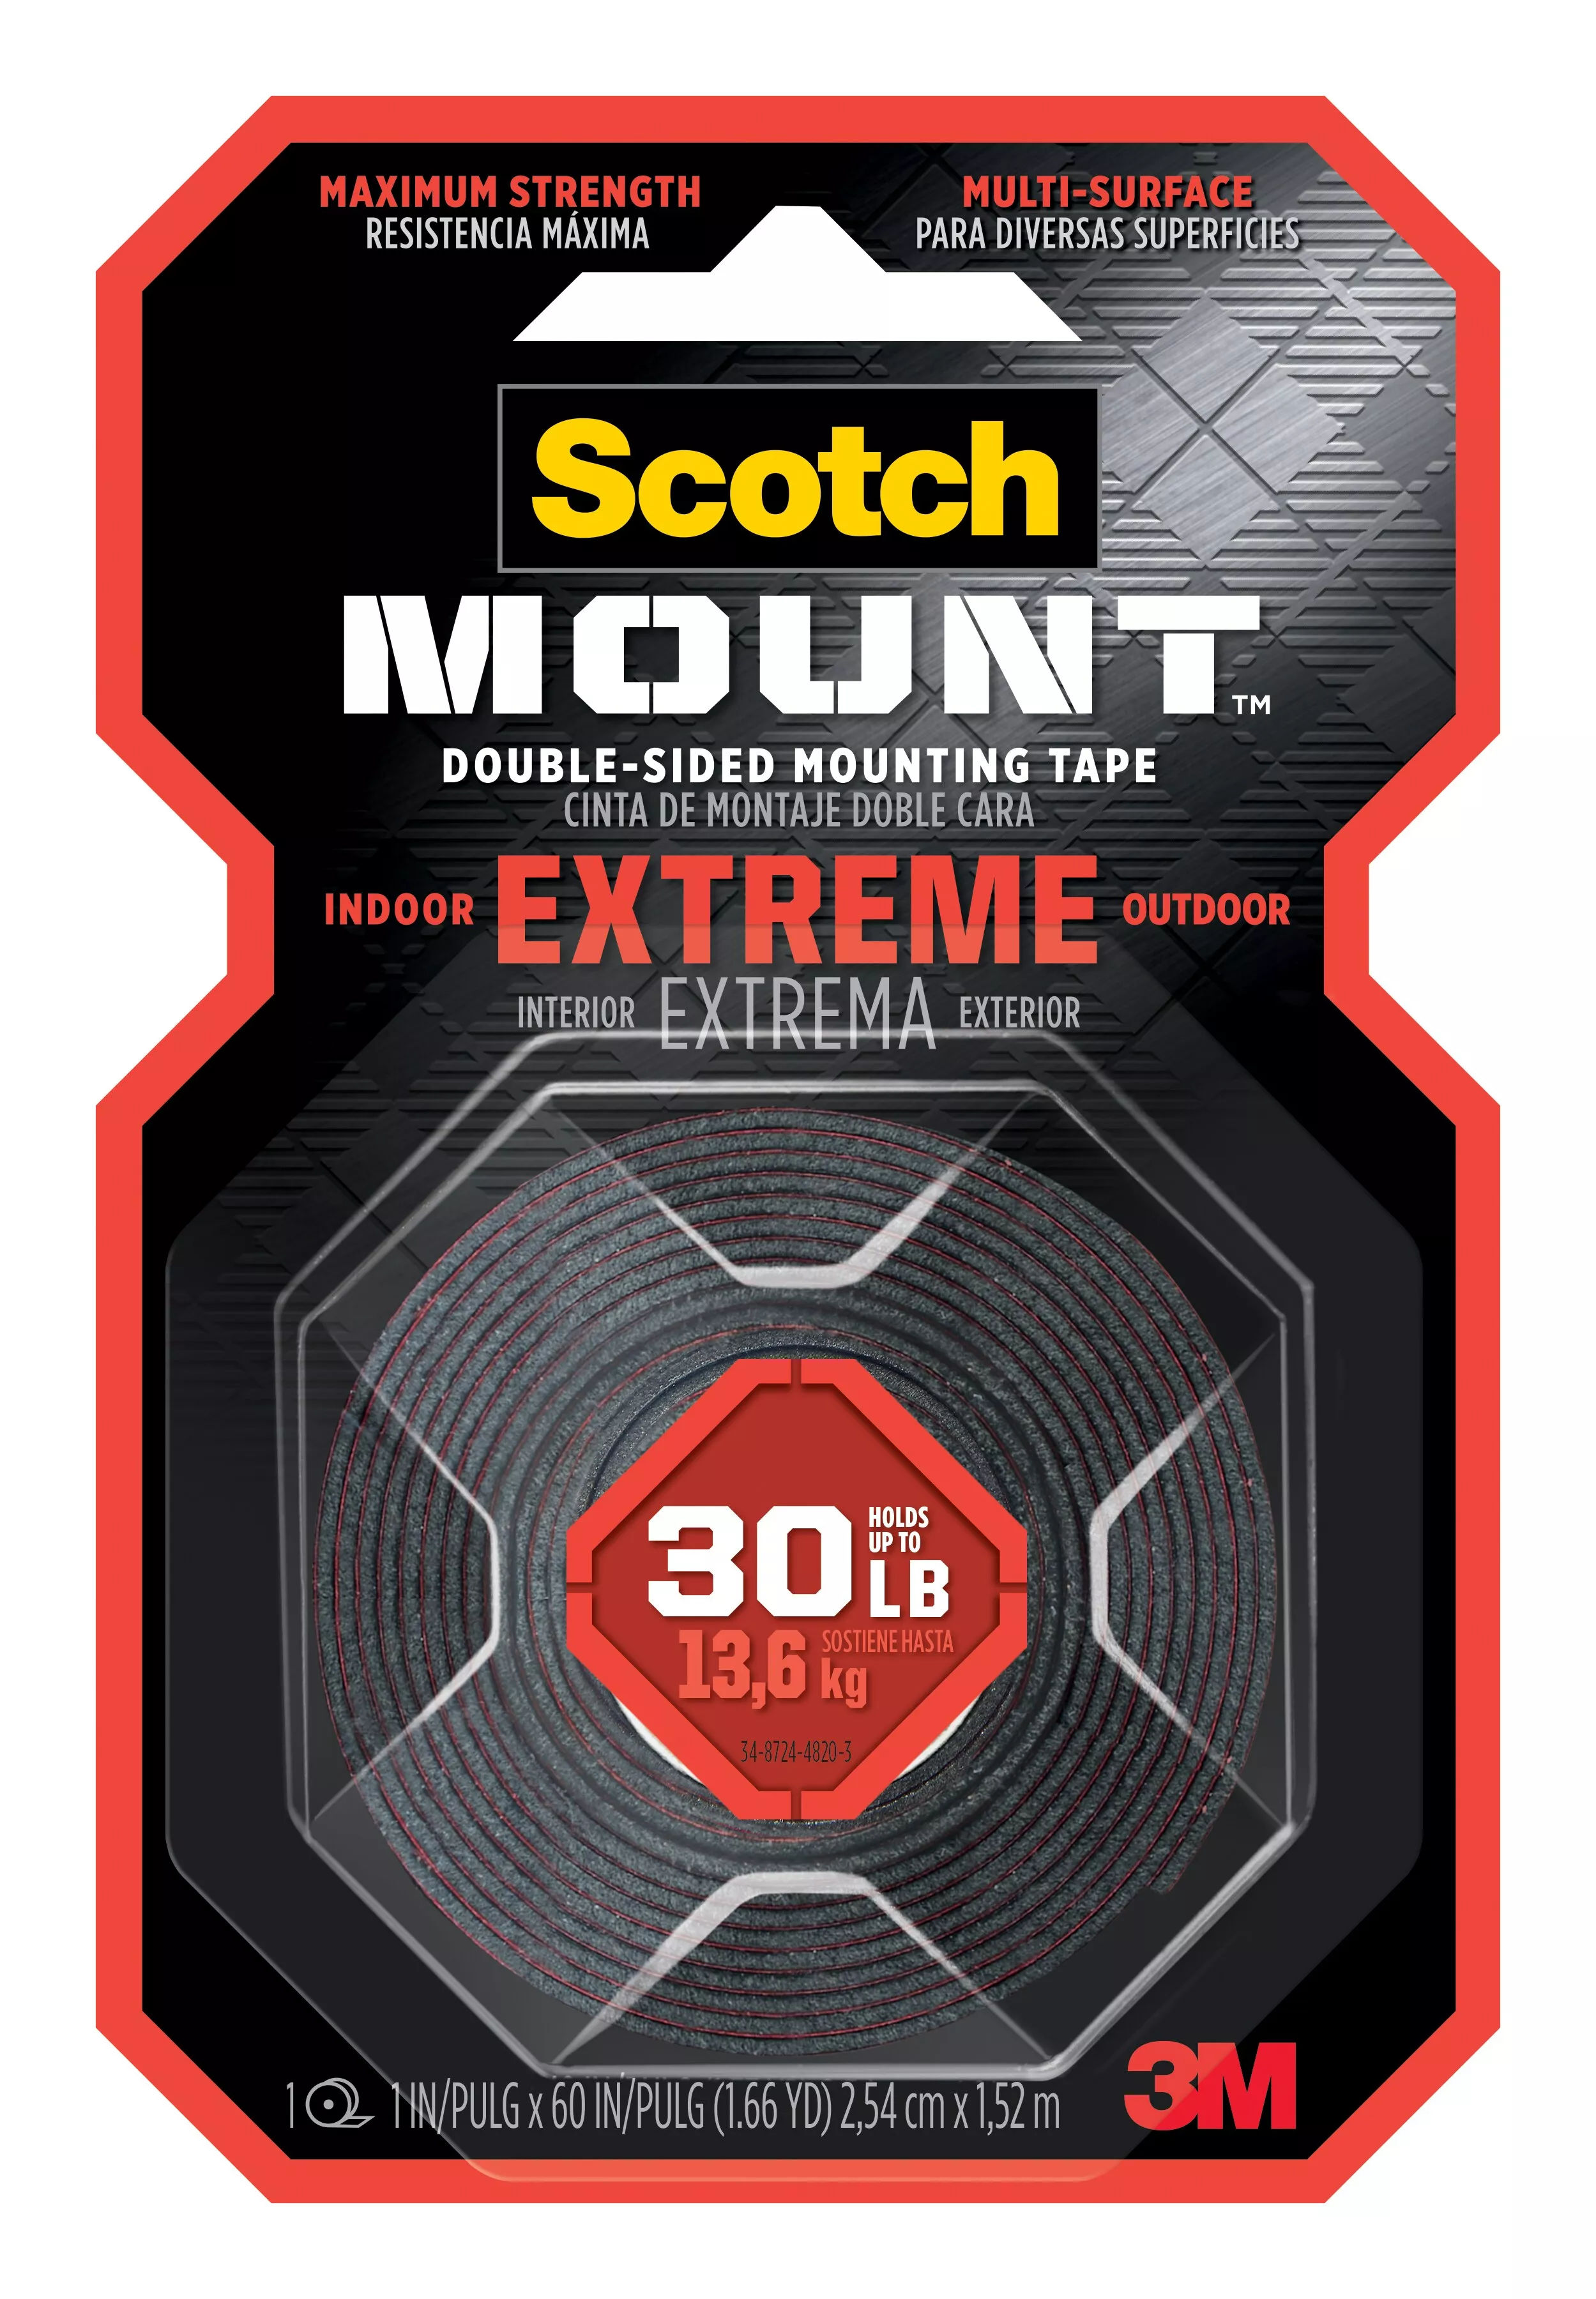 SKU 7100205646 | Scotch-Mount™ Extreme Double-Sided Mounting Tape 414H-DC